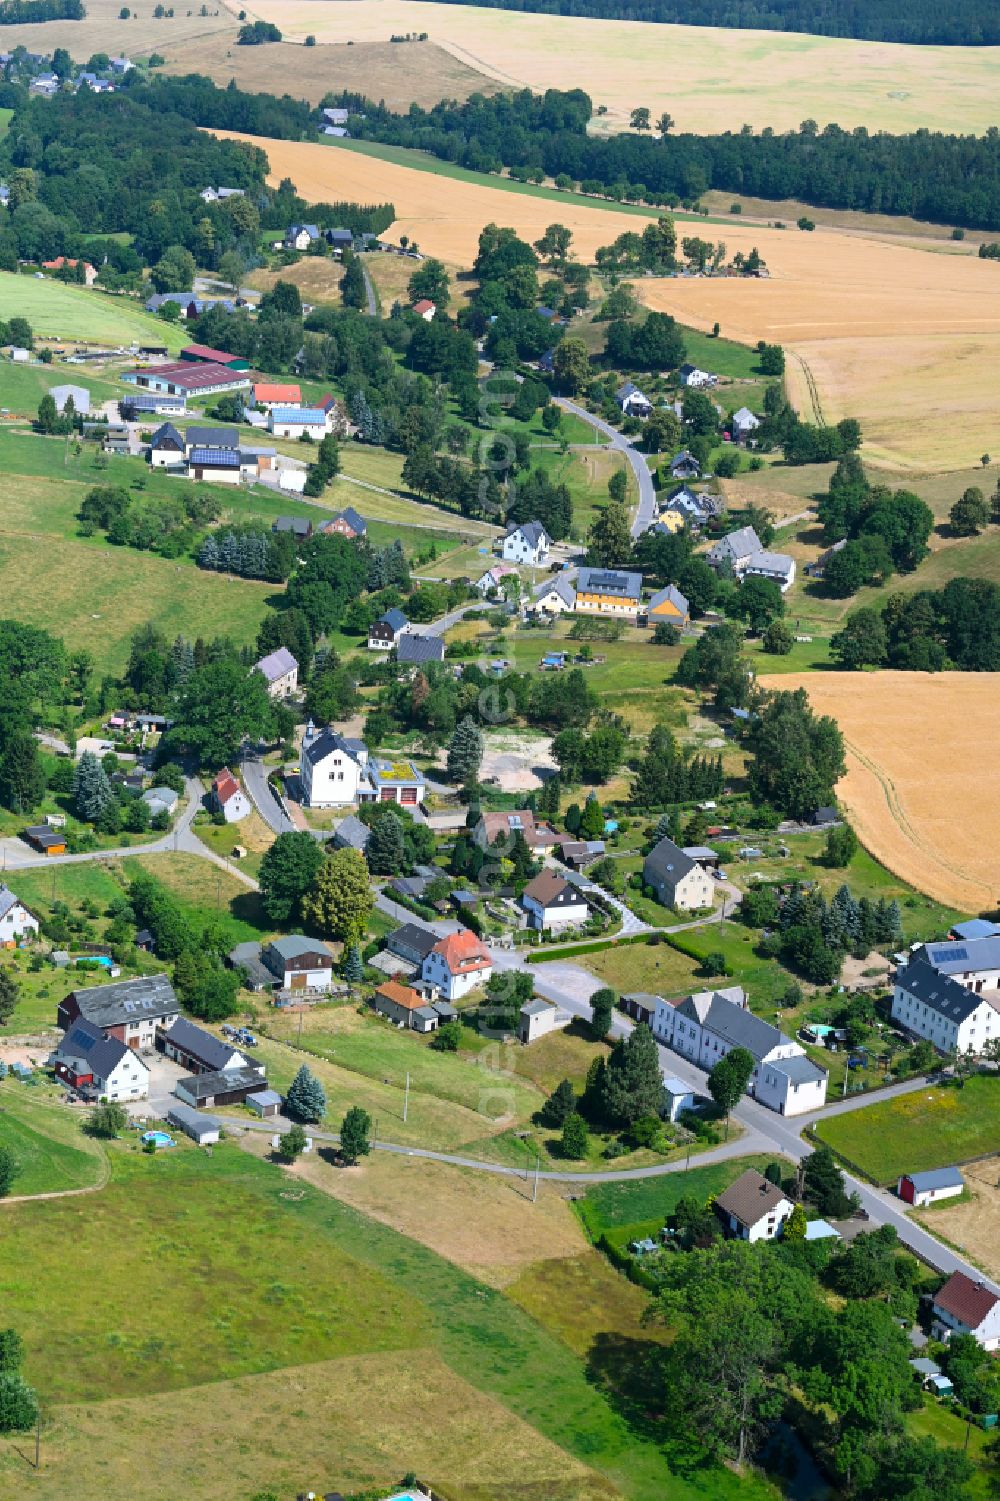 Aerial photograph Schönerstadt - Agricultural land and field boundaries surround the settlement area of the village in Schönerstadt in the state Saxony, Germany